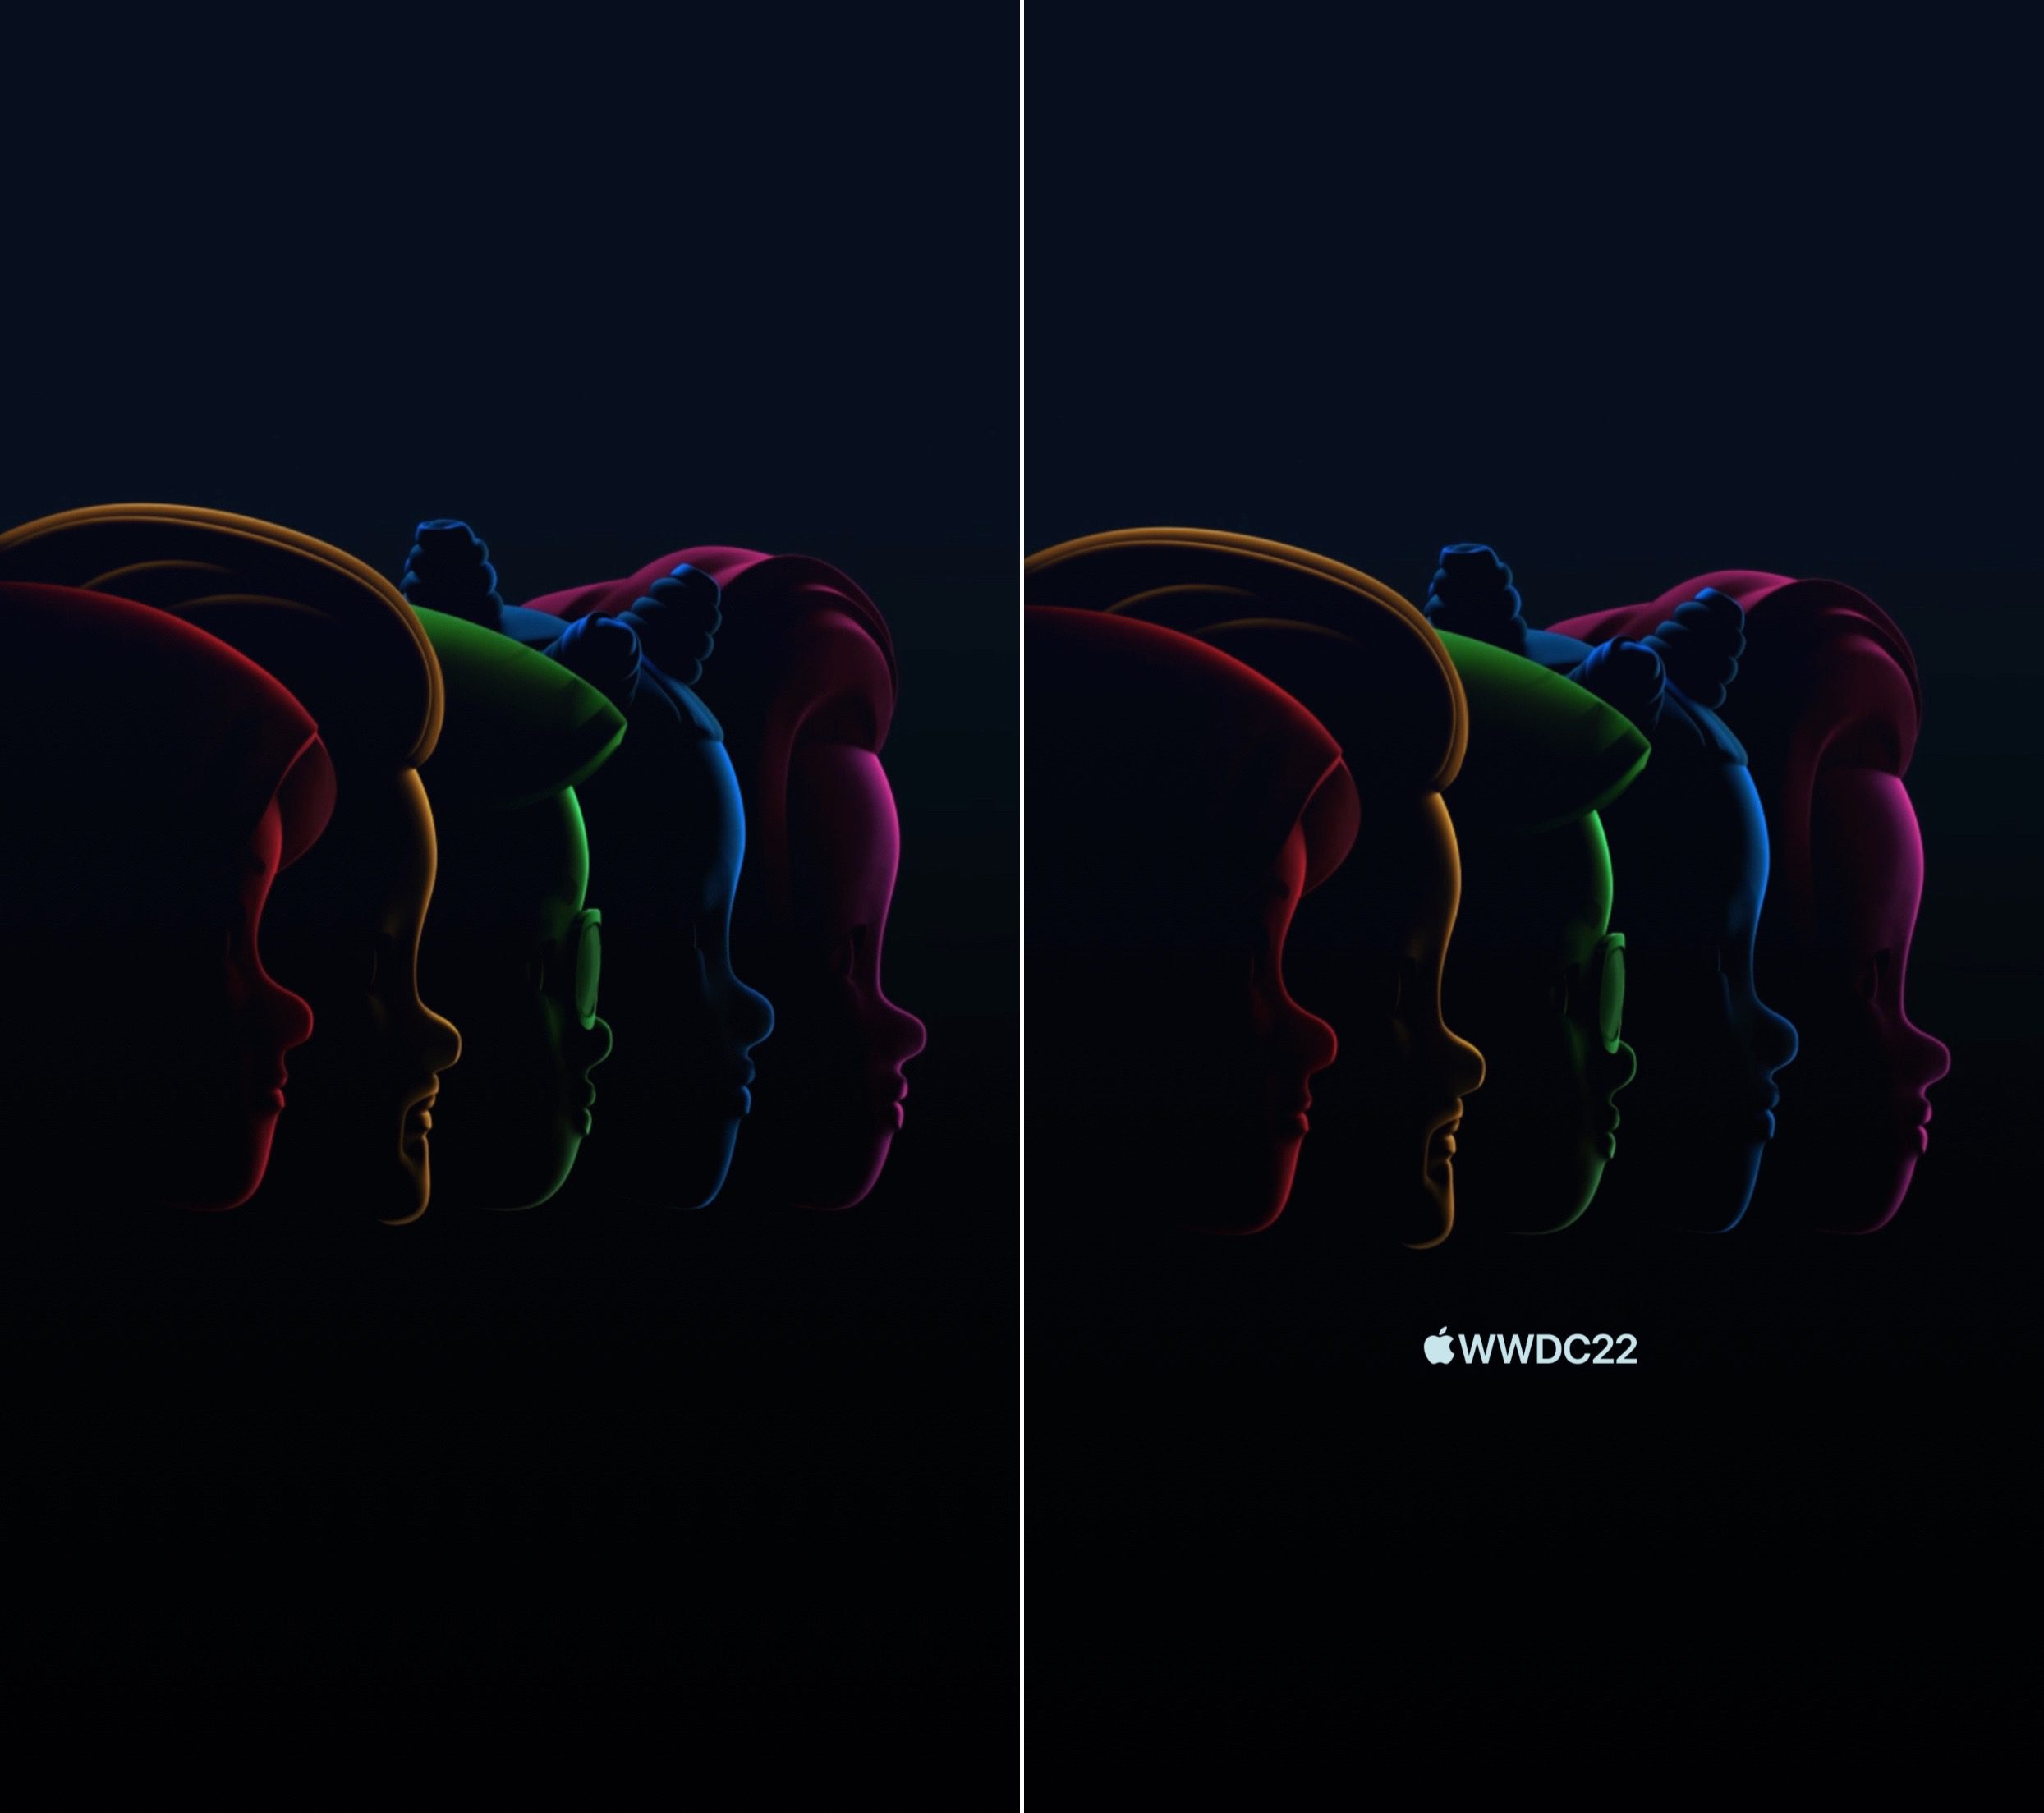 WWDC 2022 without wallpaper and logo